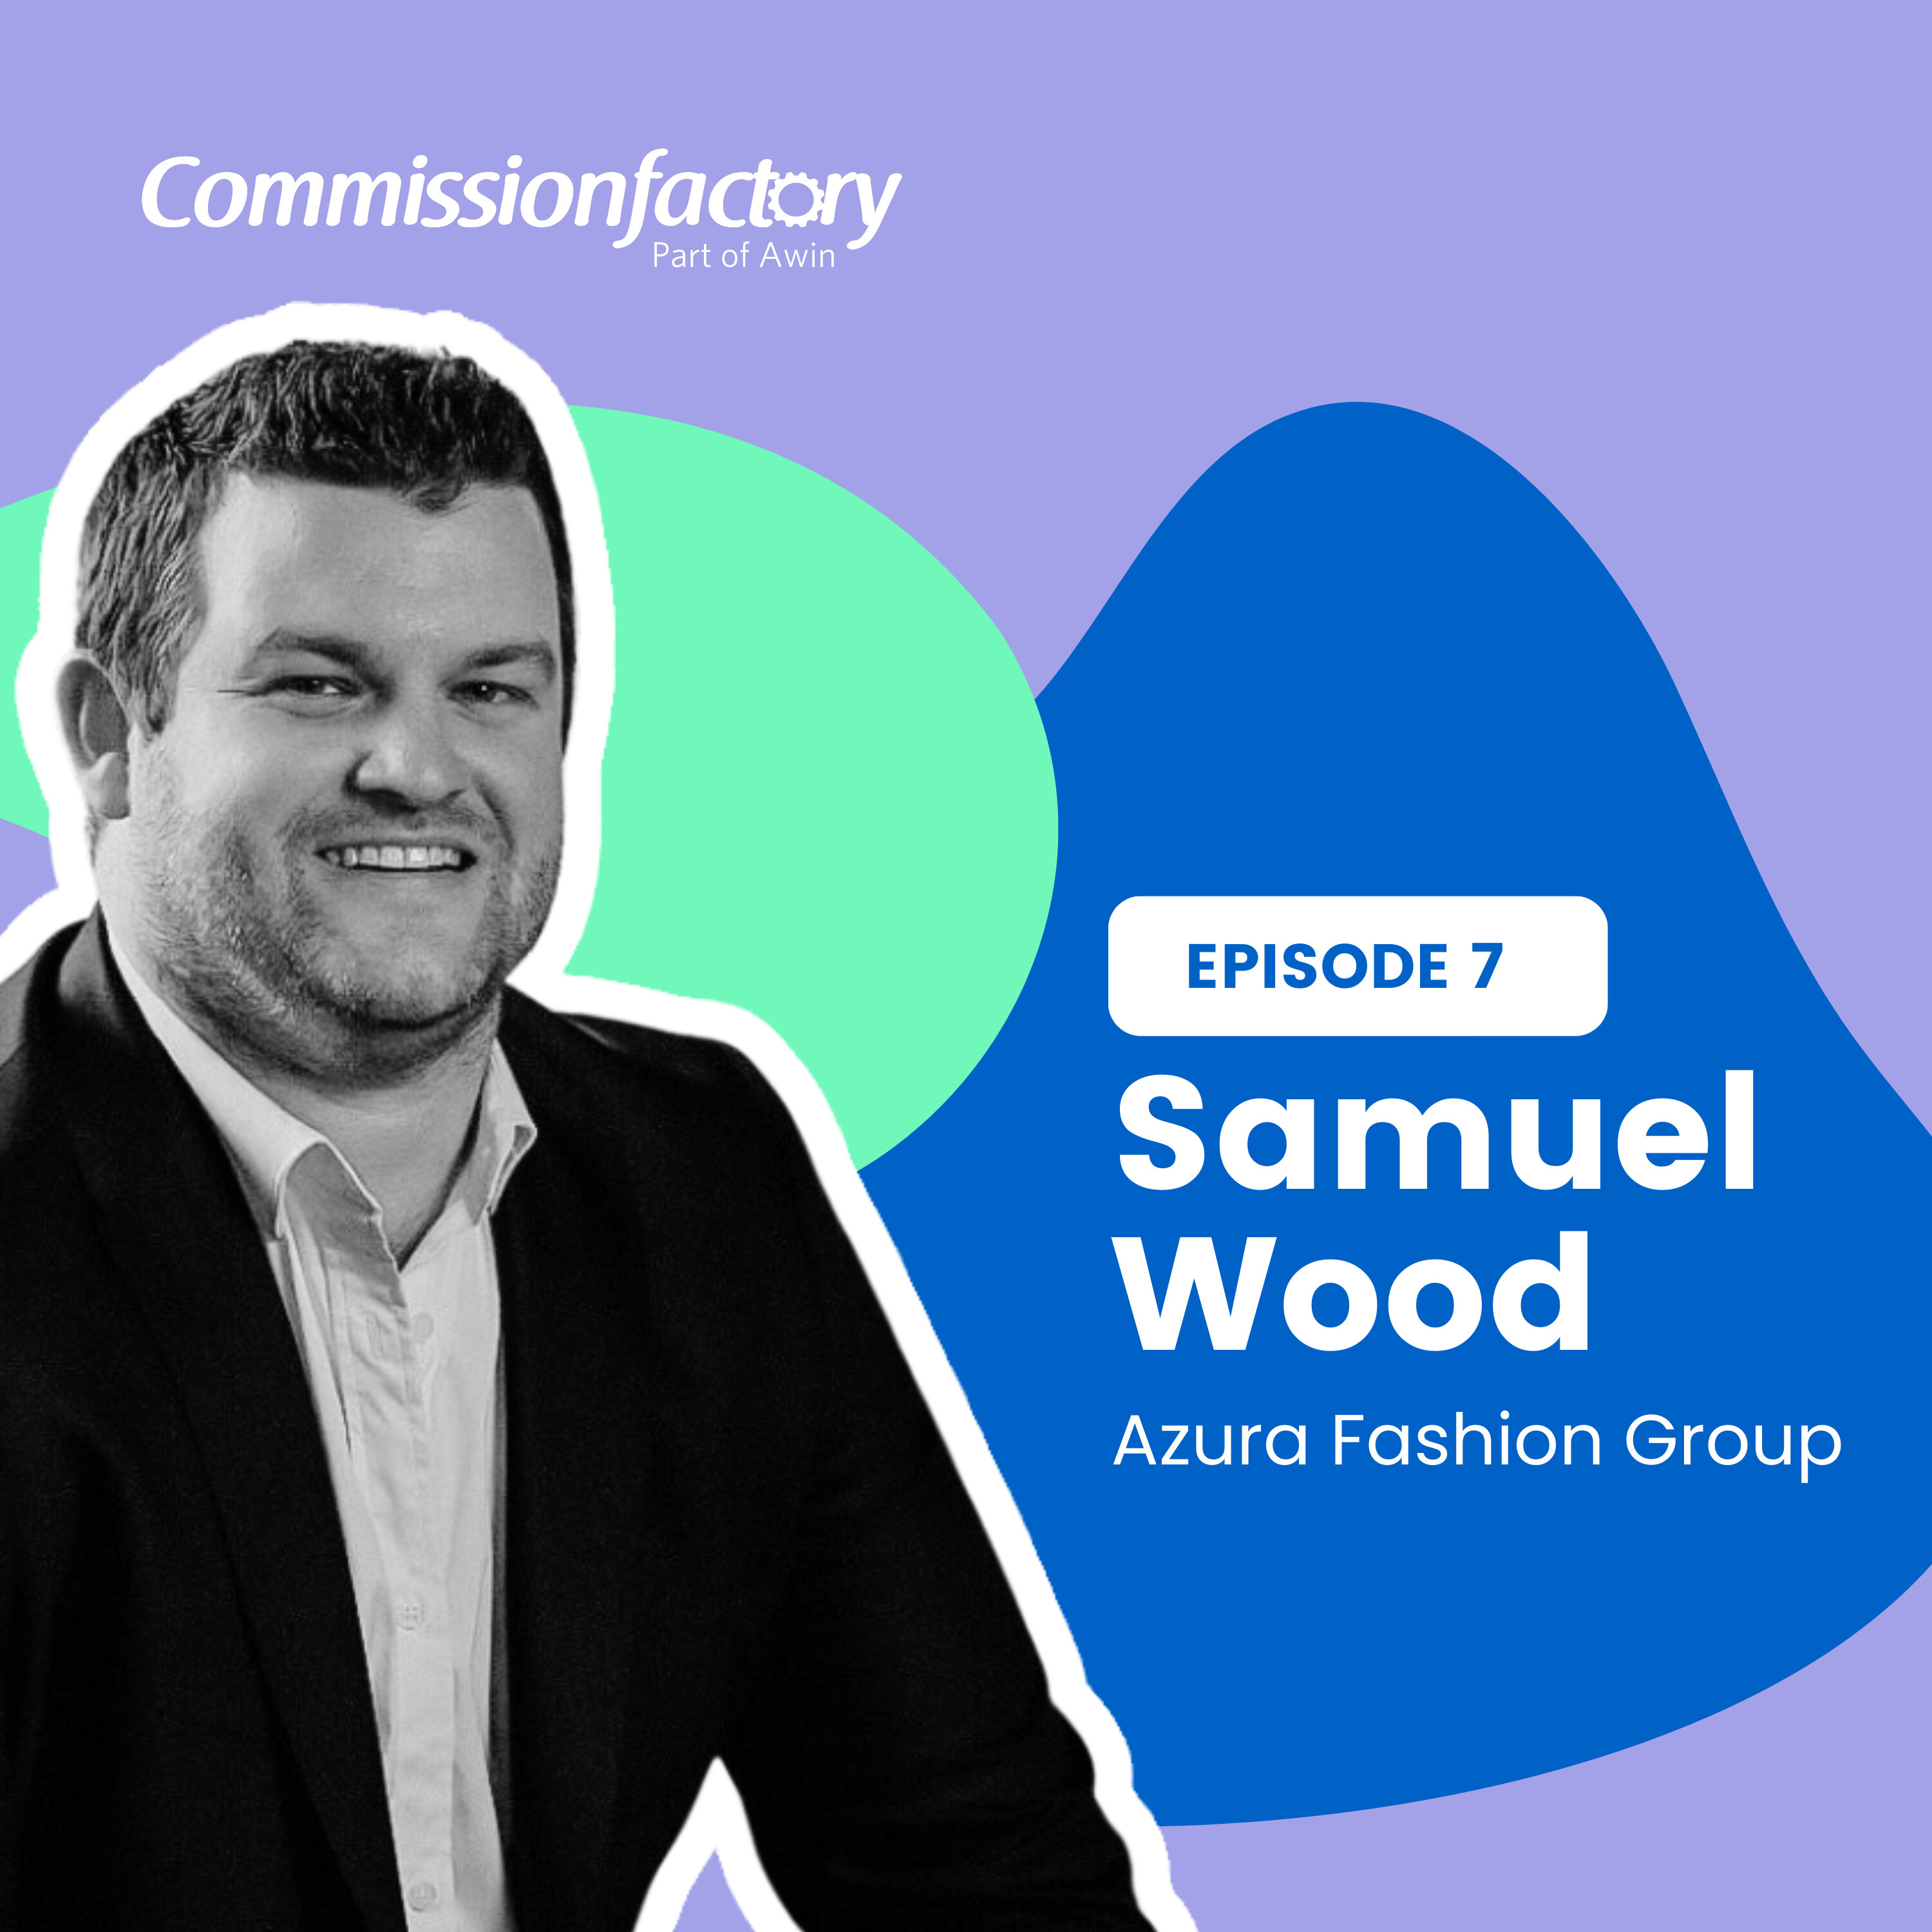 Data-Driven Innovation for Purpose with Sam Wood, Azura Fashion Group